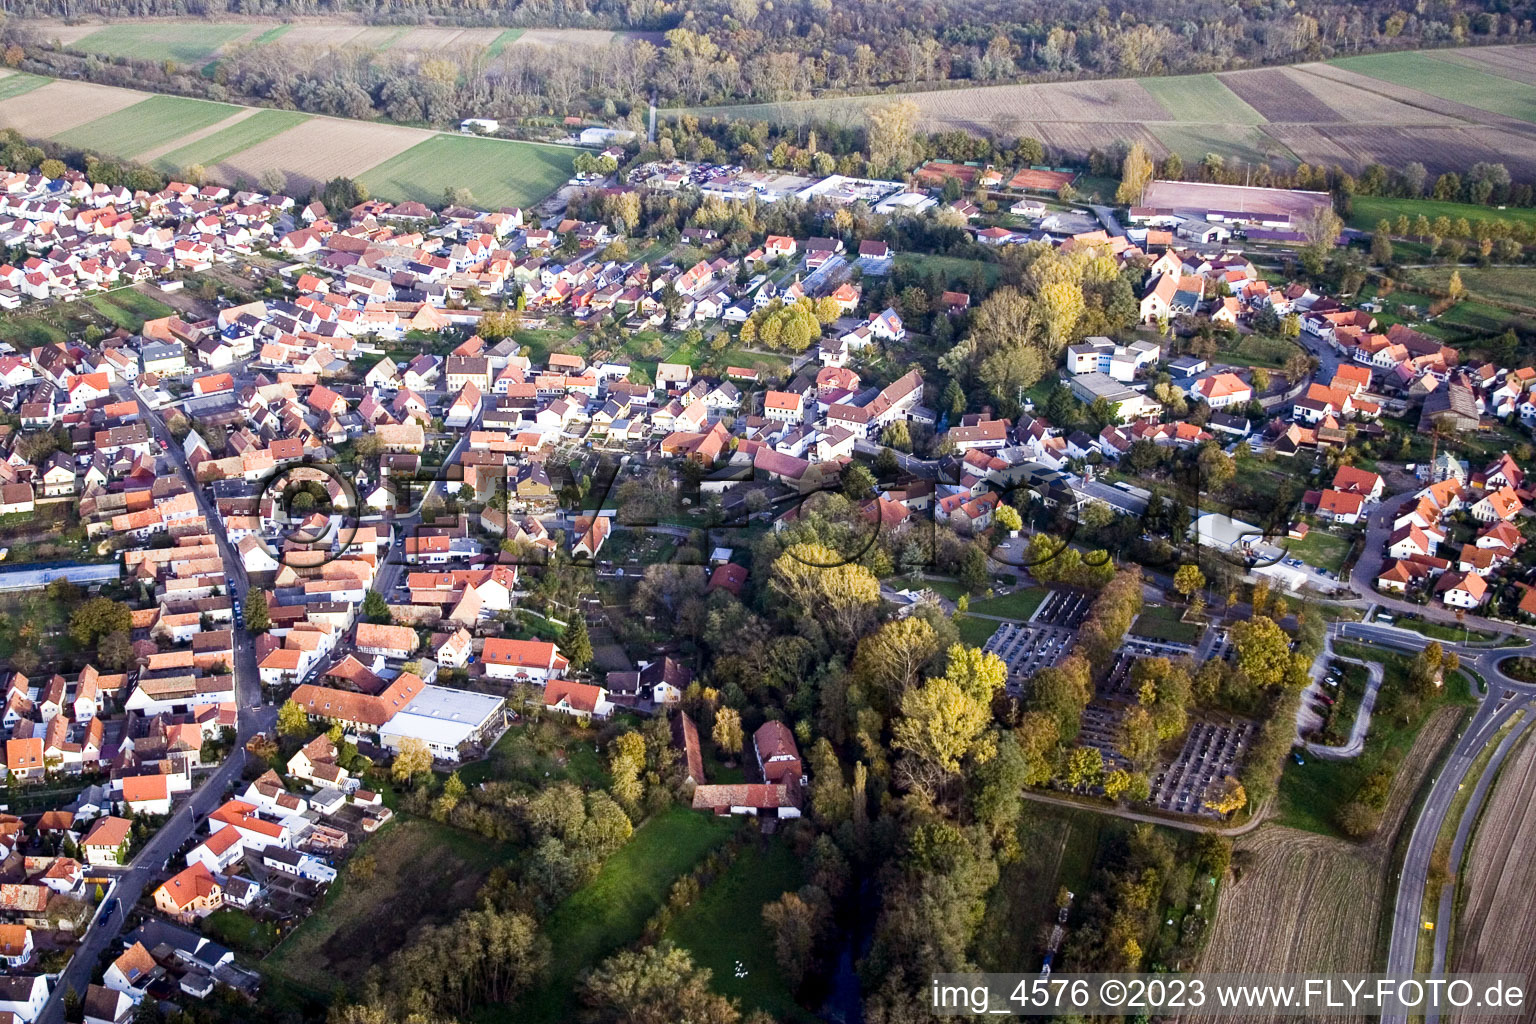 From the south in Hördt in the state Rhineland-Palatinate, Germany from above